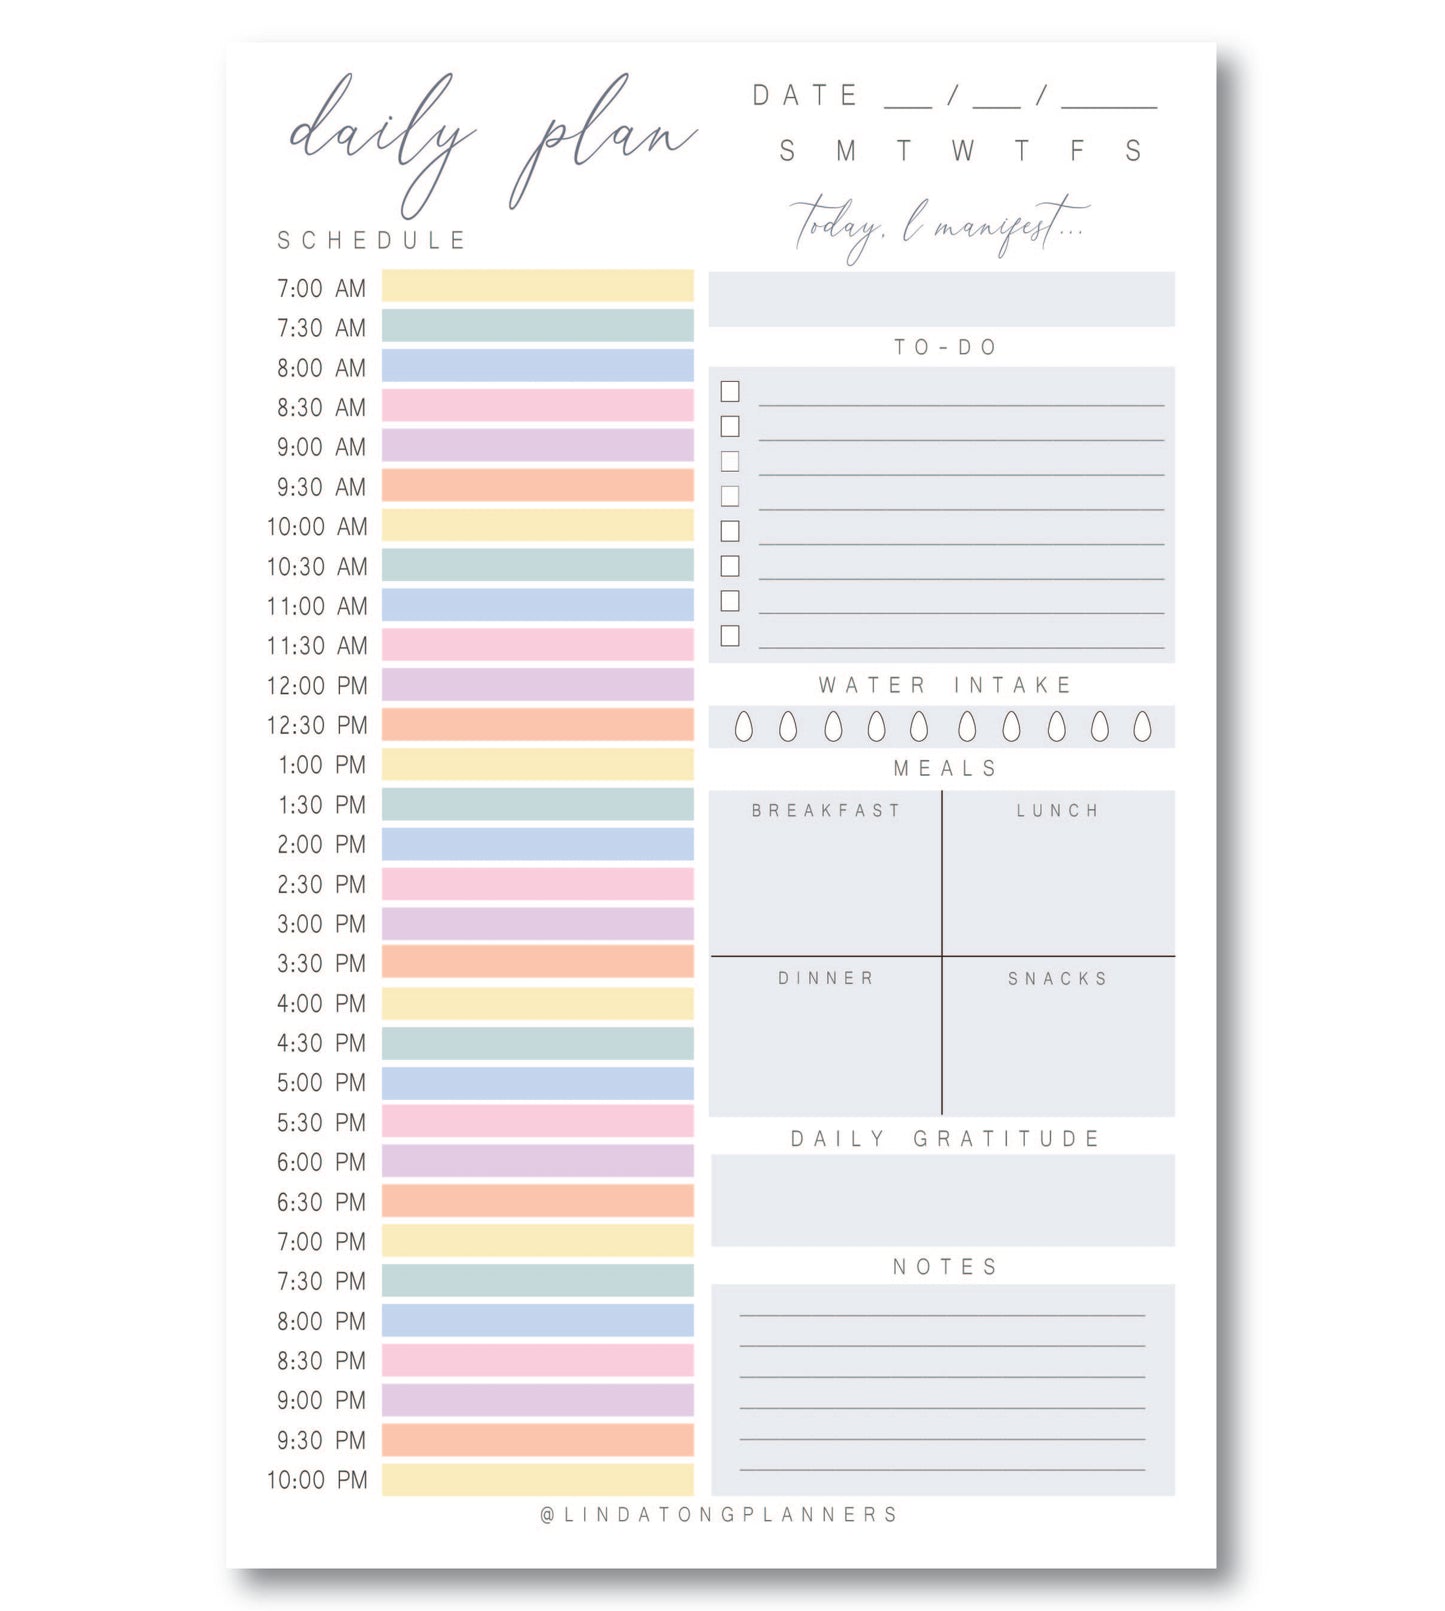 Sorbet Daily Notepad